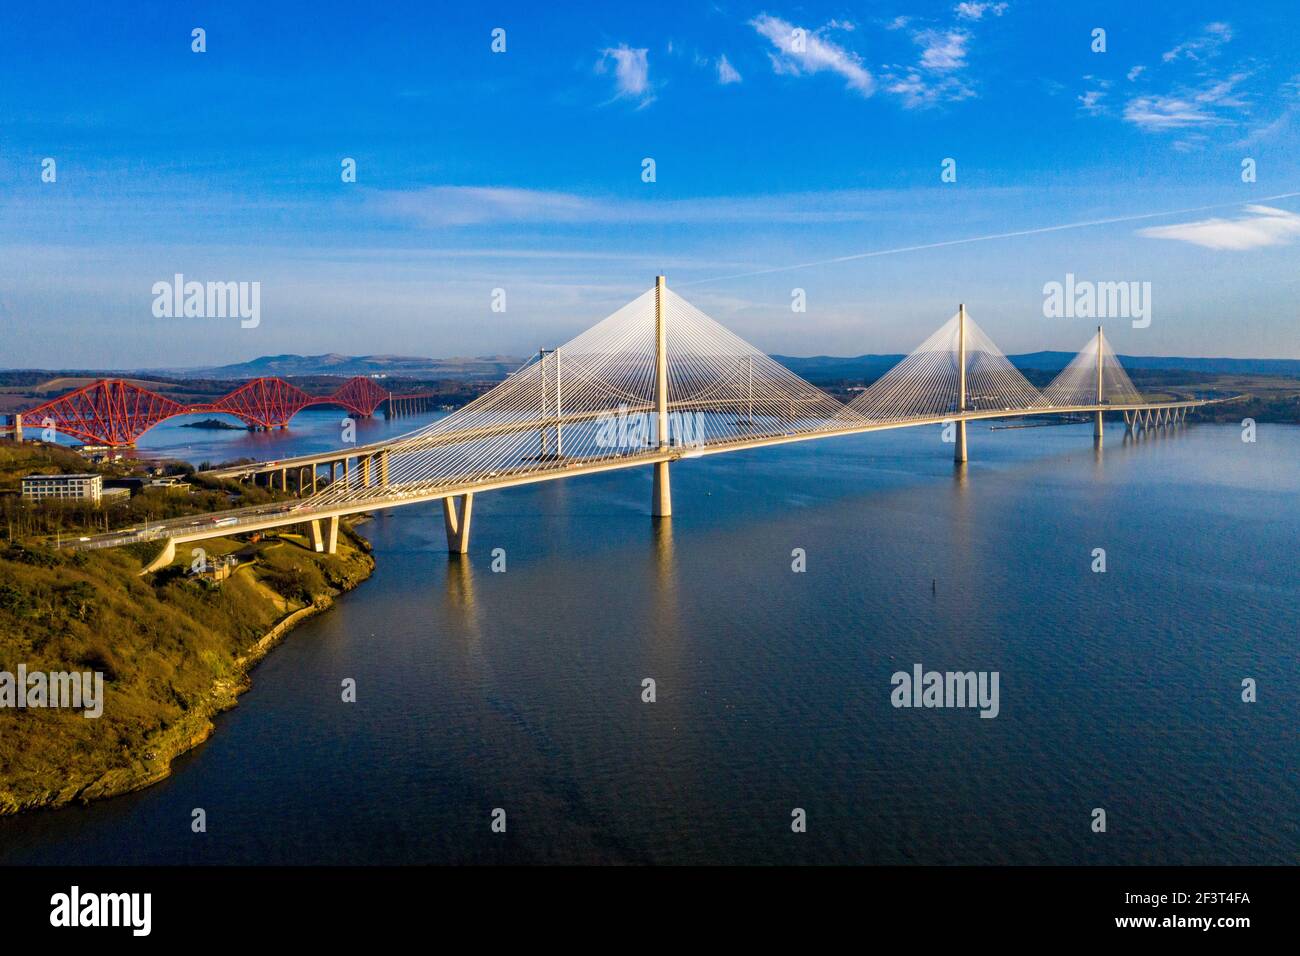 Aerial view from Rosyth showing three bridges spanning the Firth of Forth. The Queensferry Crossing, Forth Road Bridge and Forth Rail Bridge. Stock Photo